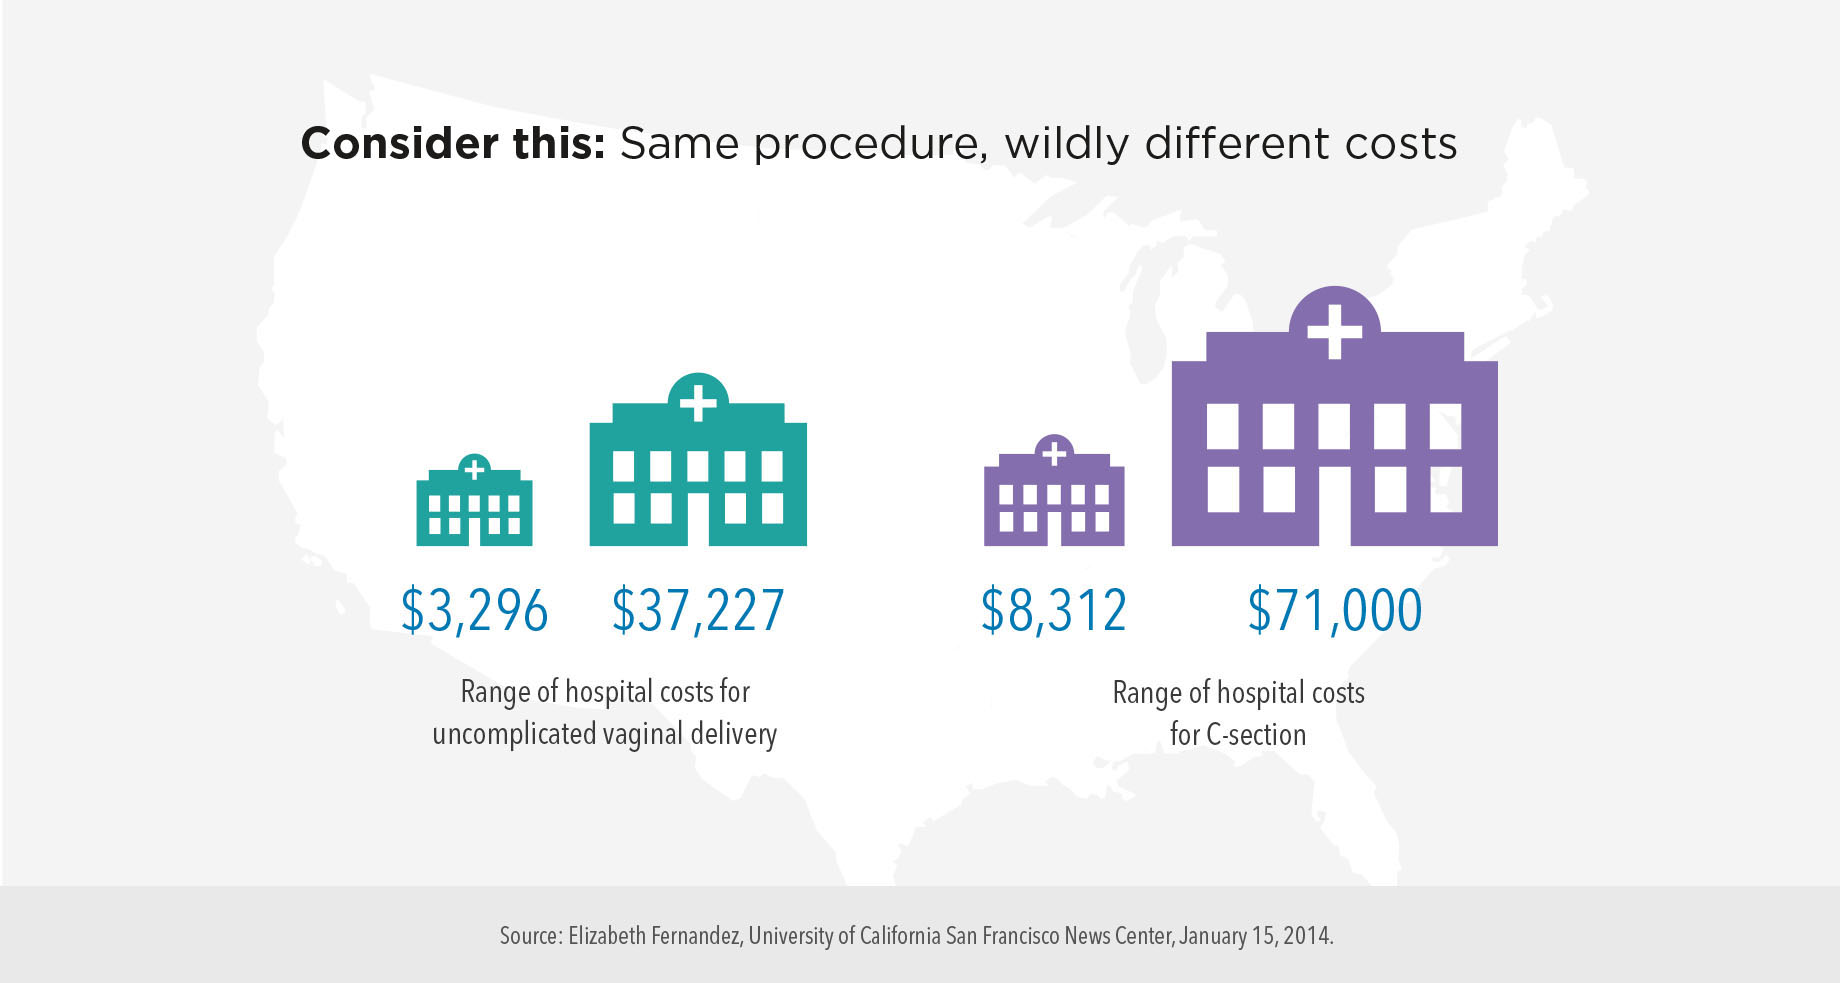 Consider this: Same procedure, wildly different costs. Hospital costs for uncomplicated vaginal delivery range from $3,296 to $37,227, whereas C-sections cost between $8,312 and $71,000.